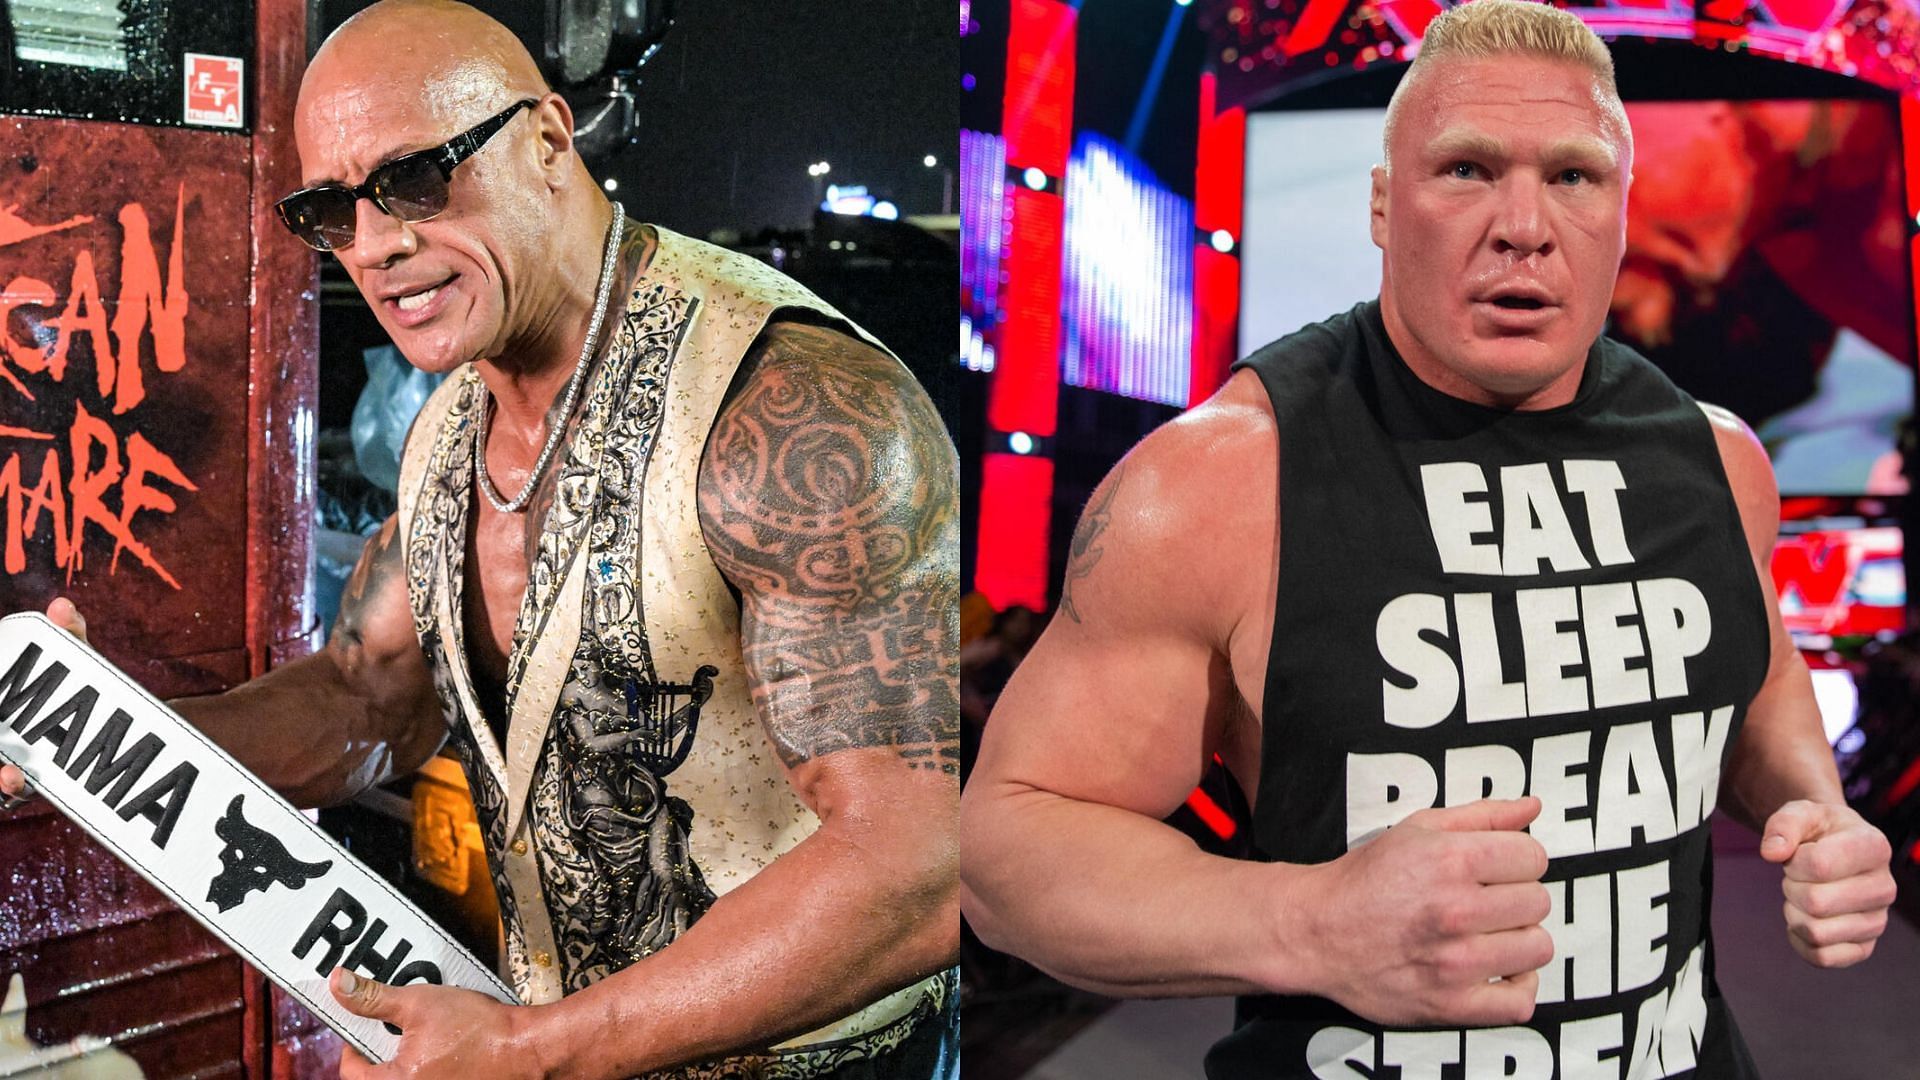 The Rock and Brock Lesnar are two of the biggest stars in WWE history